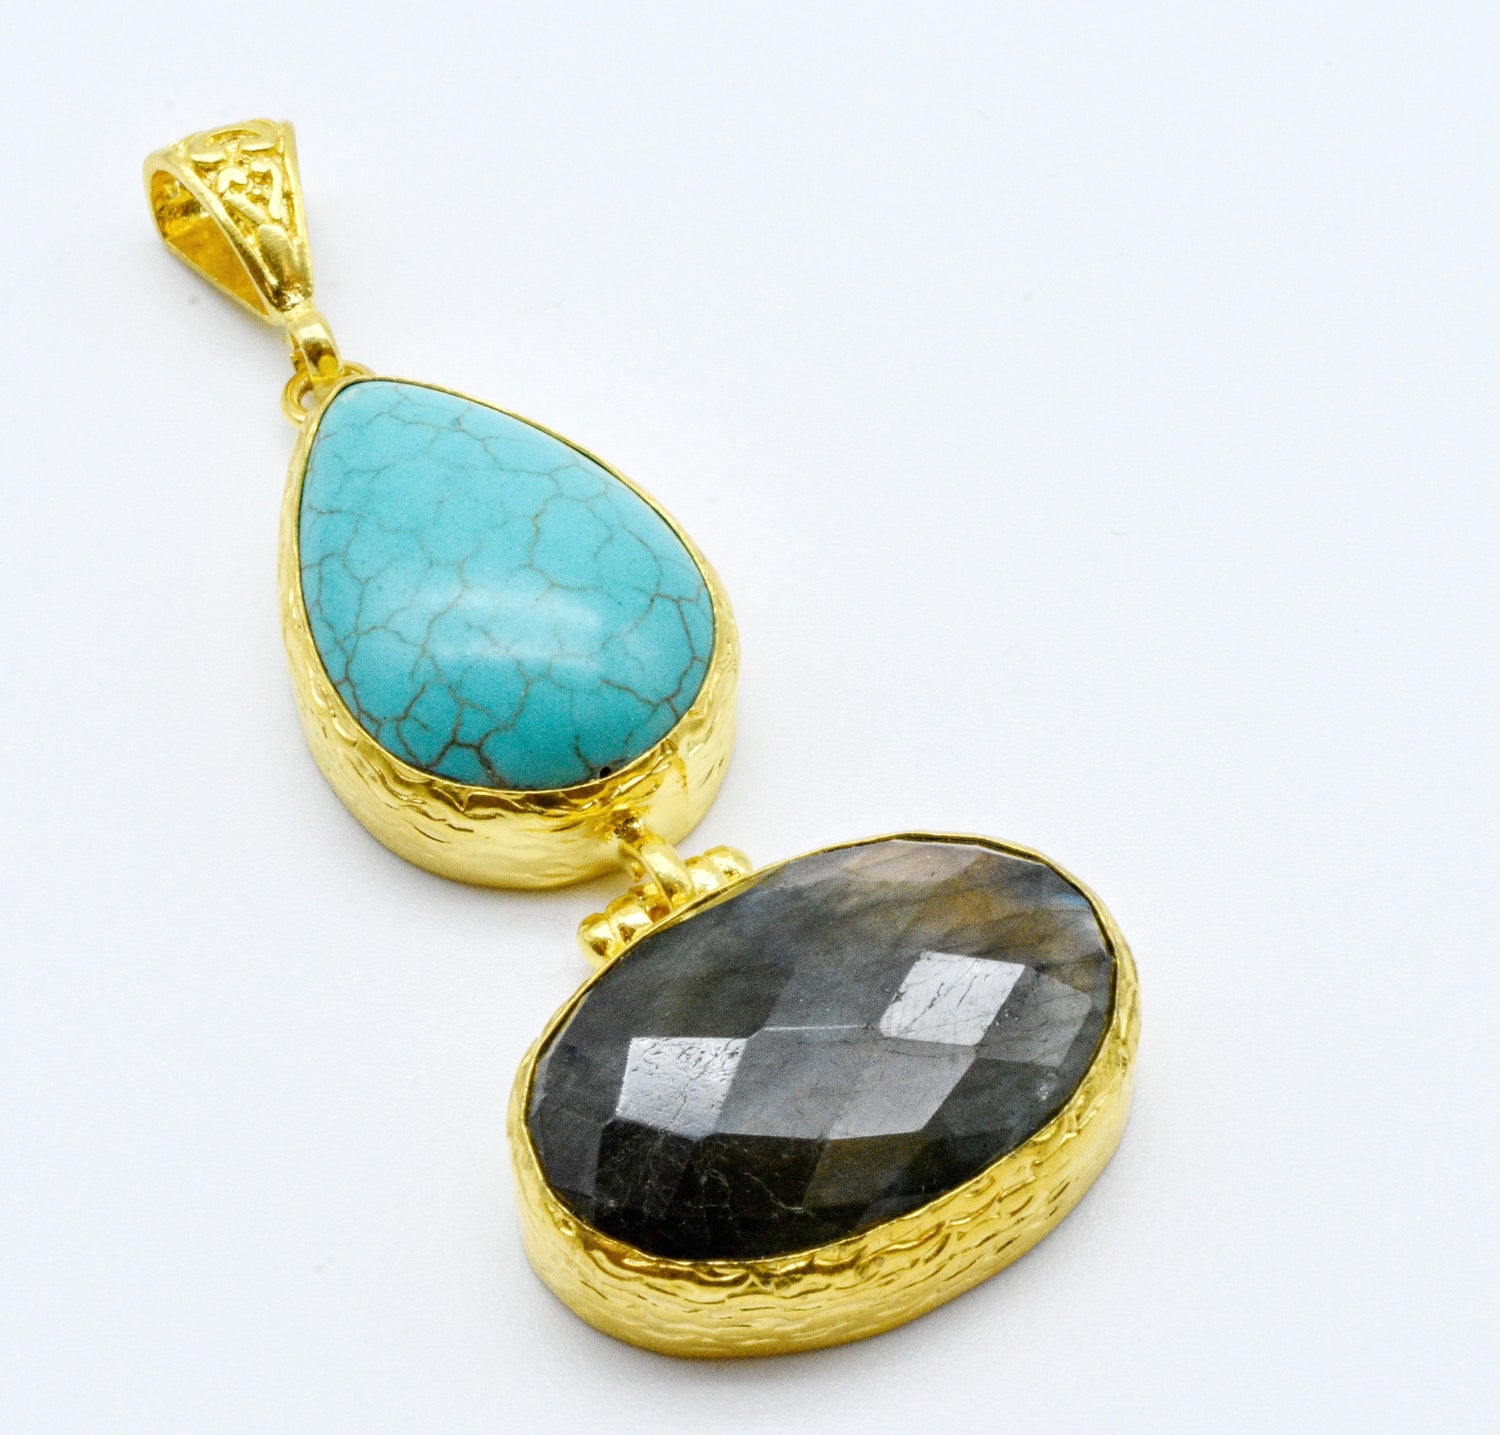 Aylas ottoman gold plated gem stone necklace Turquoise, Labradorite - Ottoman Handmade Jewellery Hand Made Gold Plated